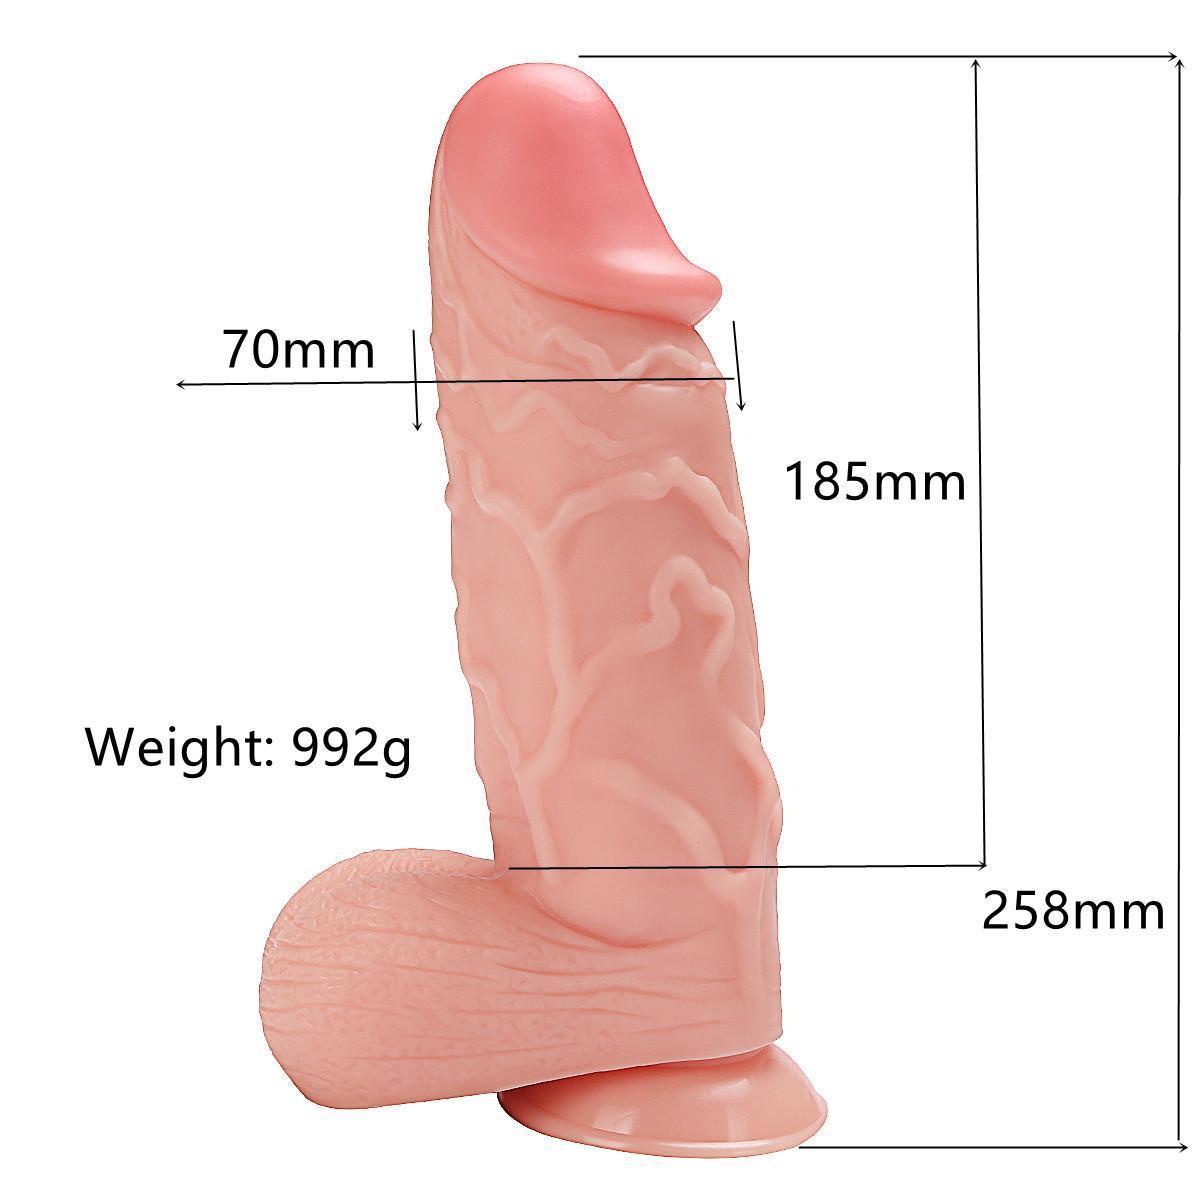 11 inch hot selling imitation and fake penis, sturdy stallion, adult sex toy Huge Dildo wl274